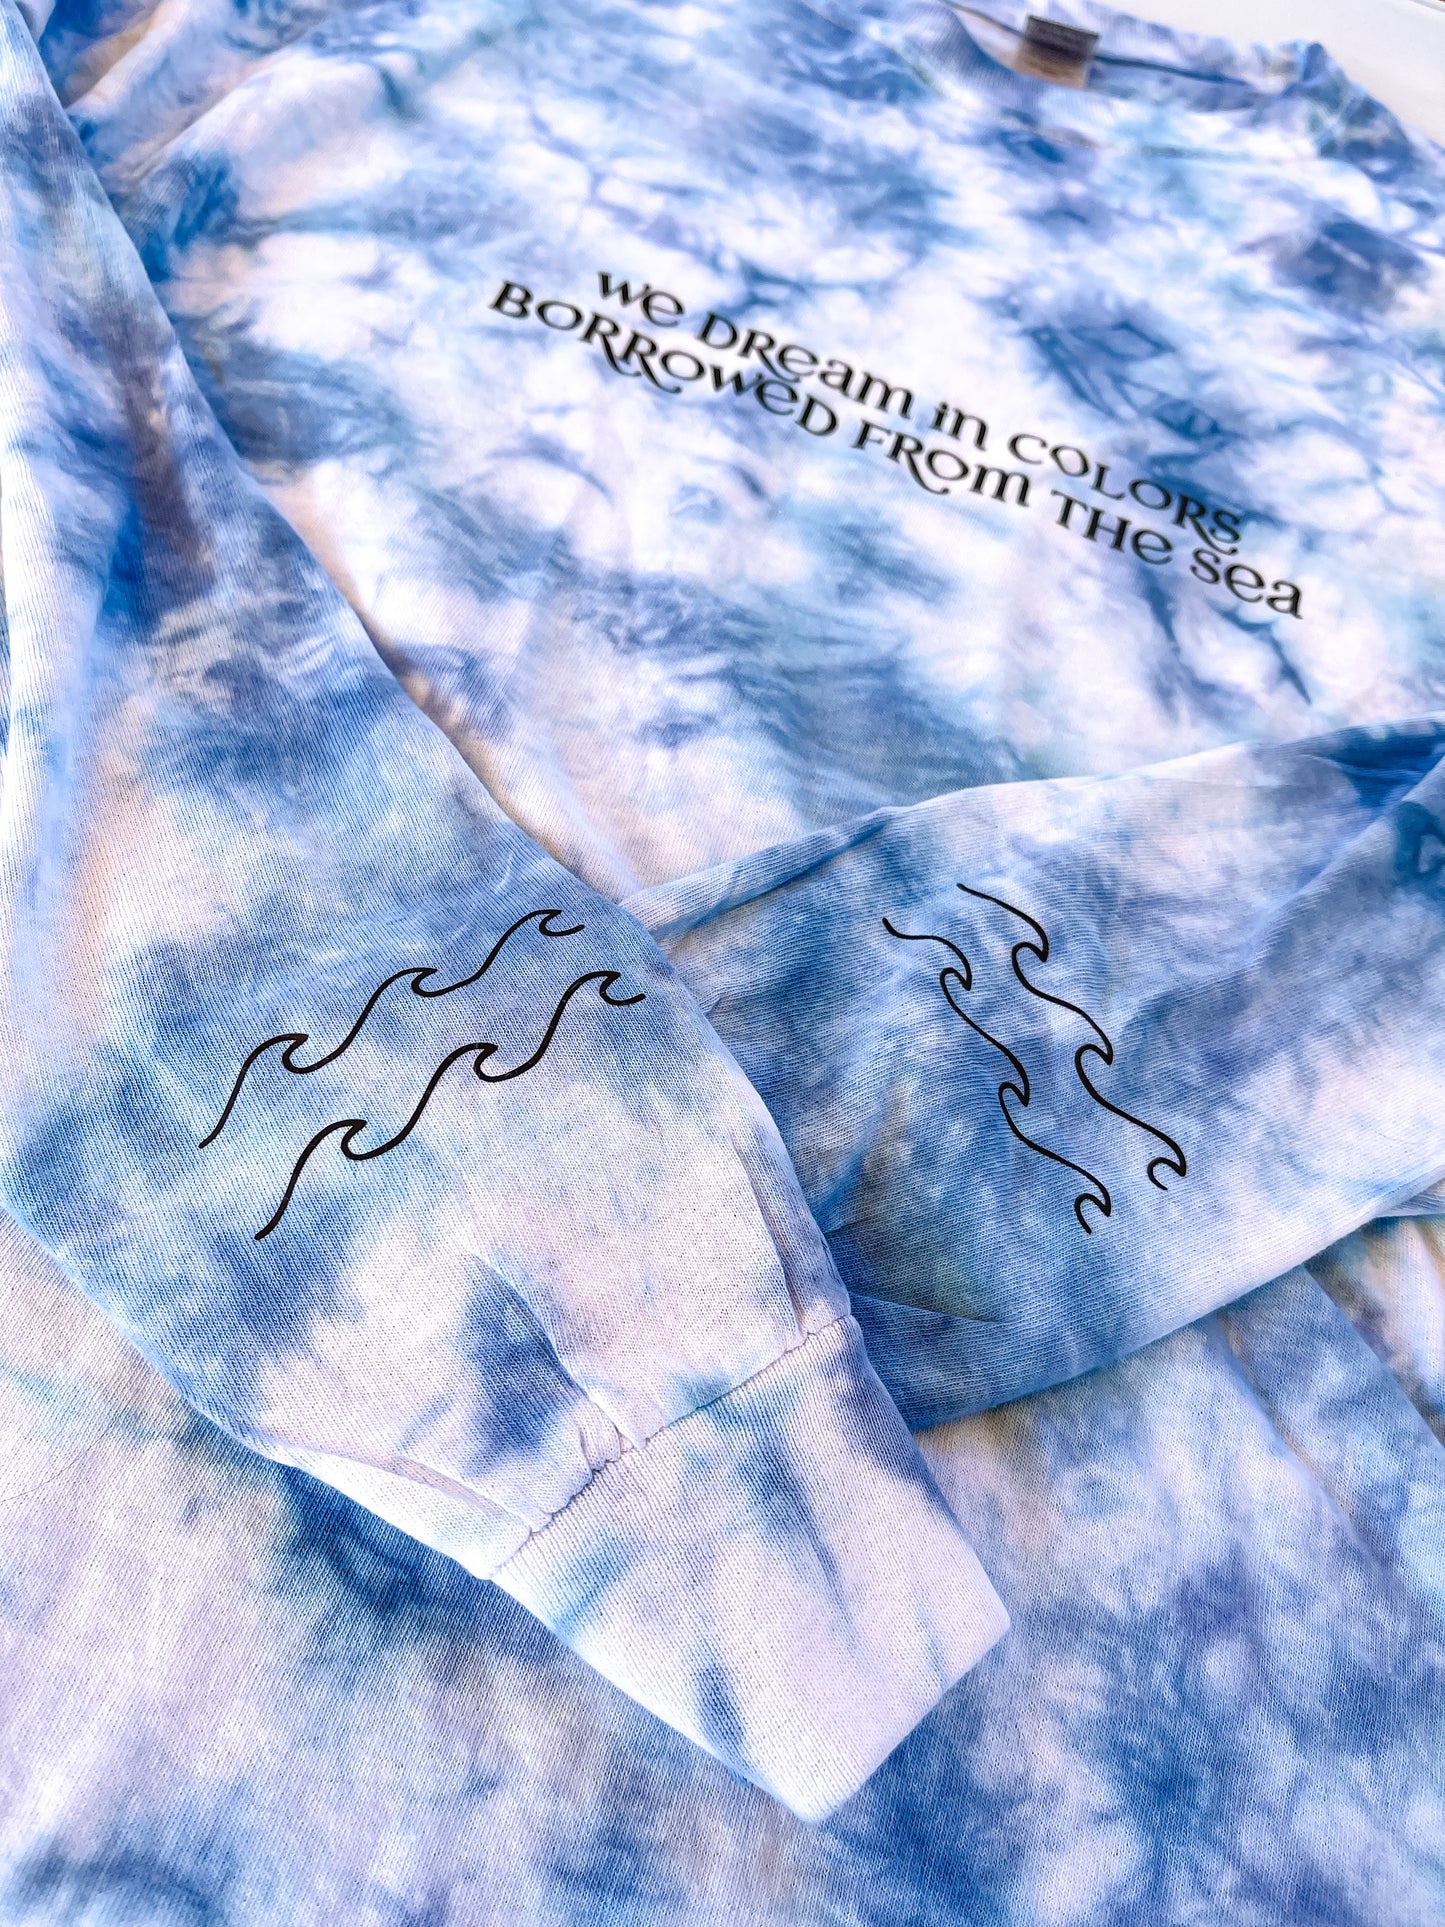 We Dream in Colors Borrowed from the Sea Tie Dye Long Sleeve